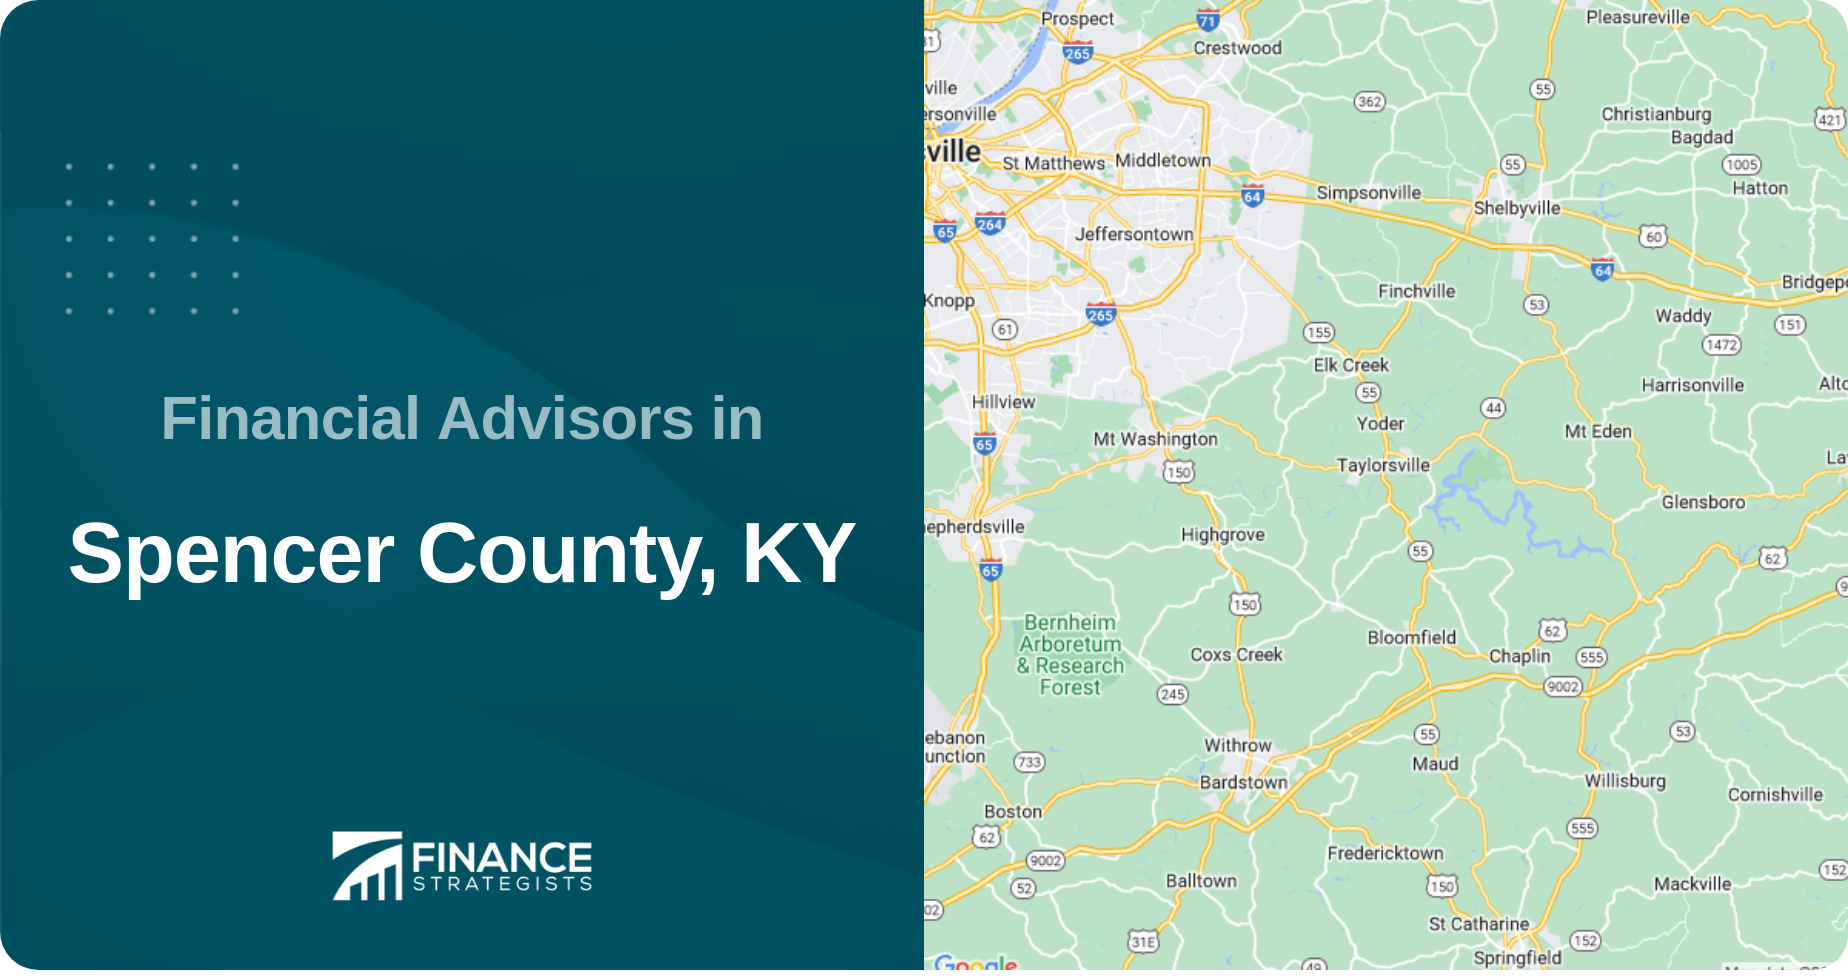 Financial Advisors in Spencer County, KY